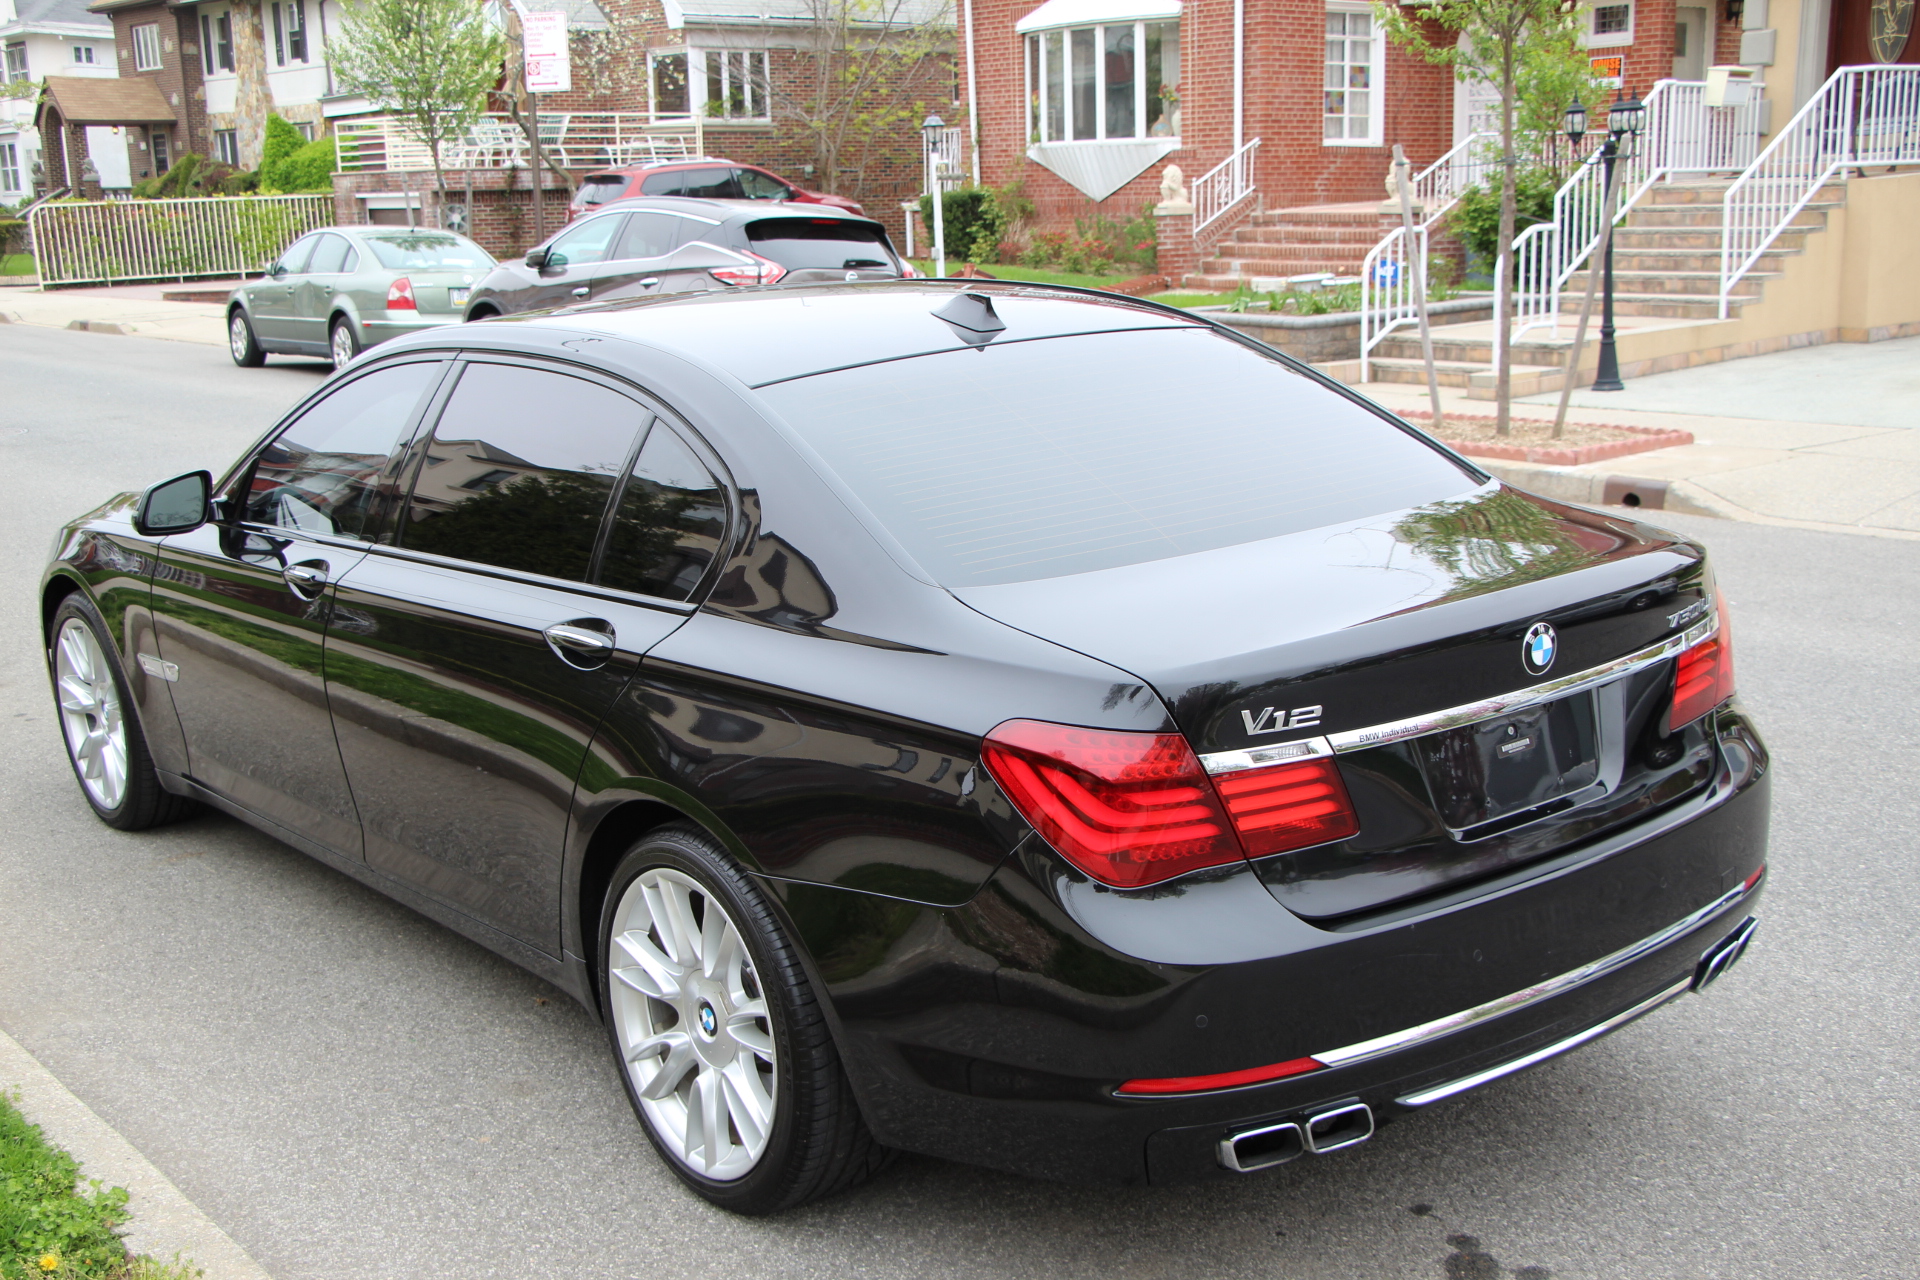 Buy Used 2013 BMW 760LI INDIVIDUAL for $34 900 from trusted dealer in  Brooklyn, NY!